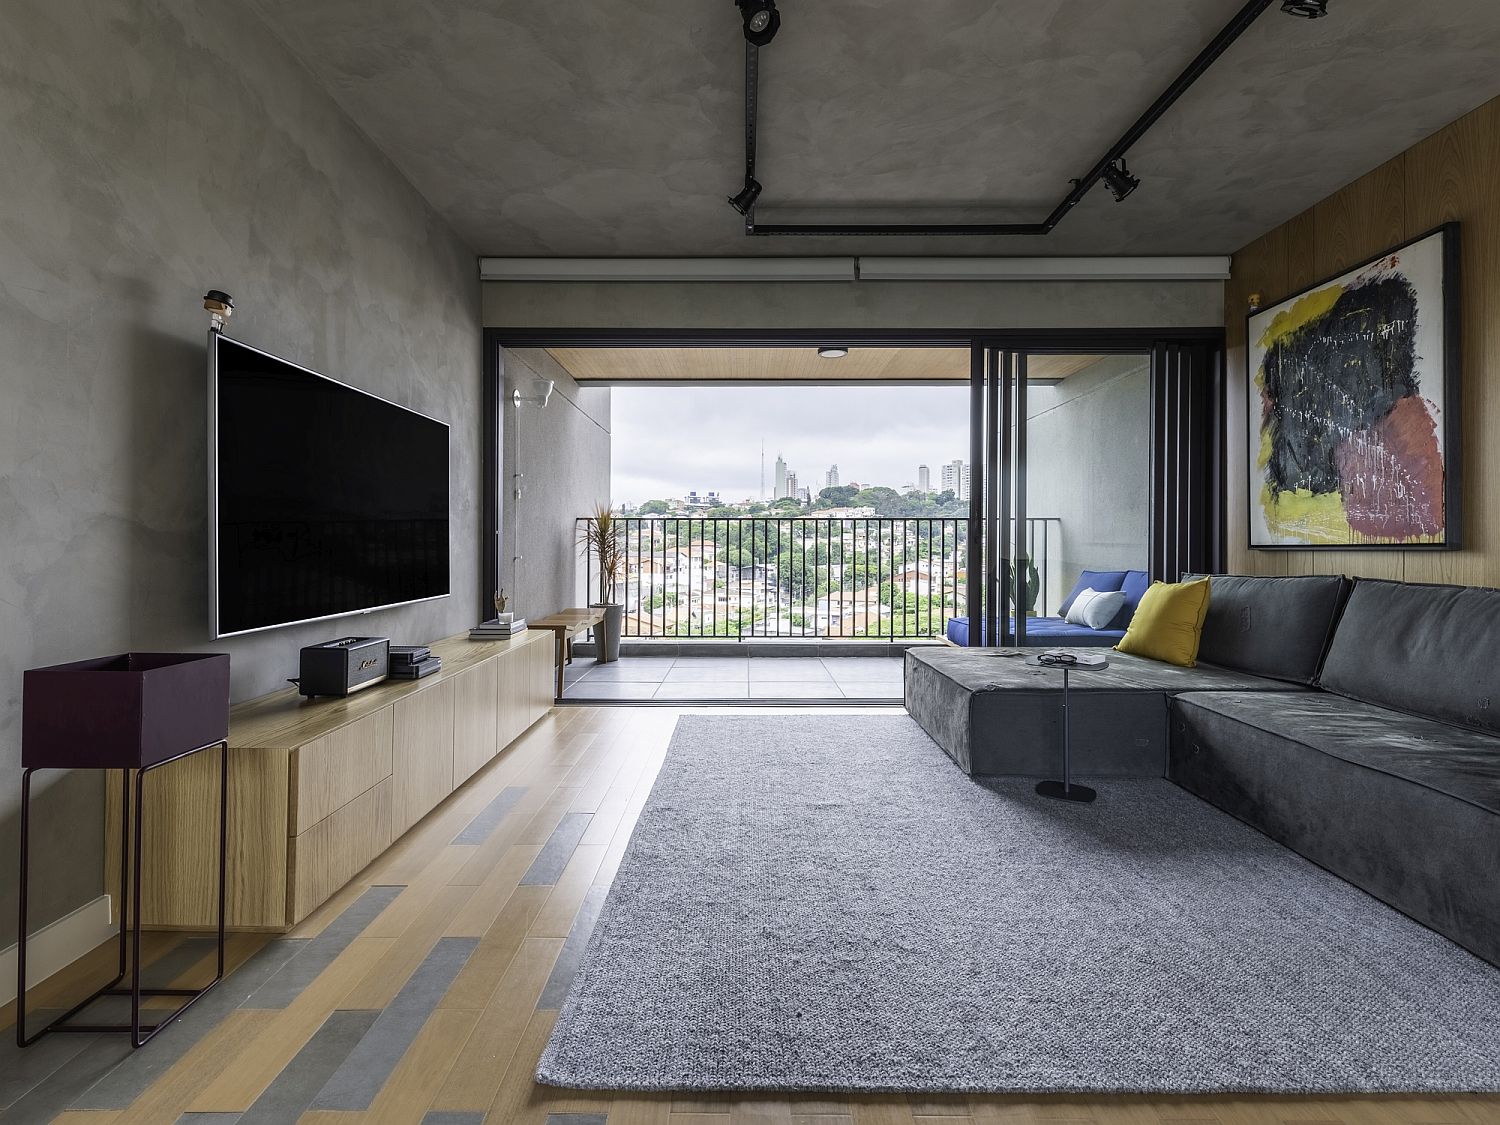 Spacious living room with wooden floor and concrete ceiling and walls